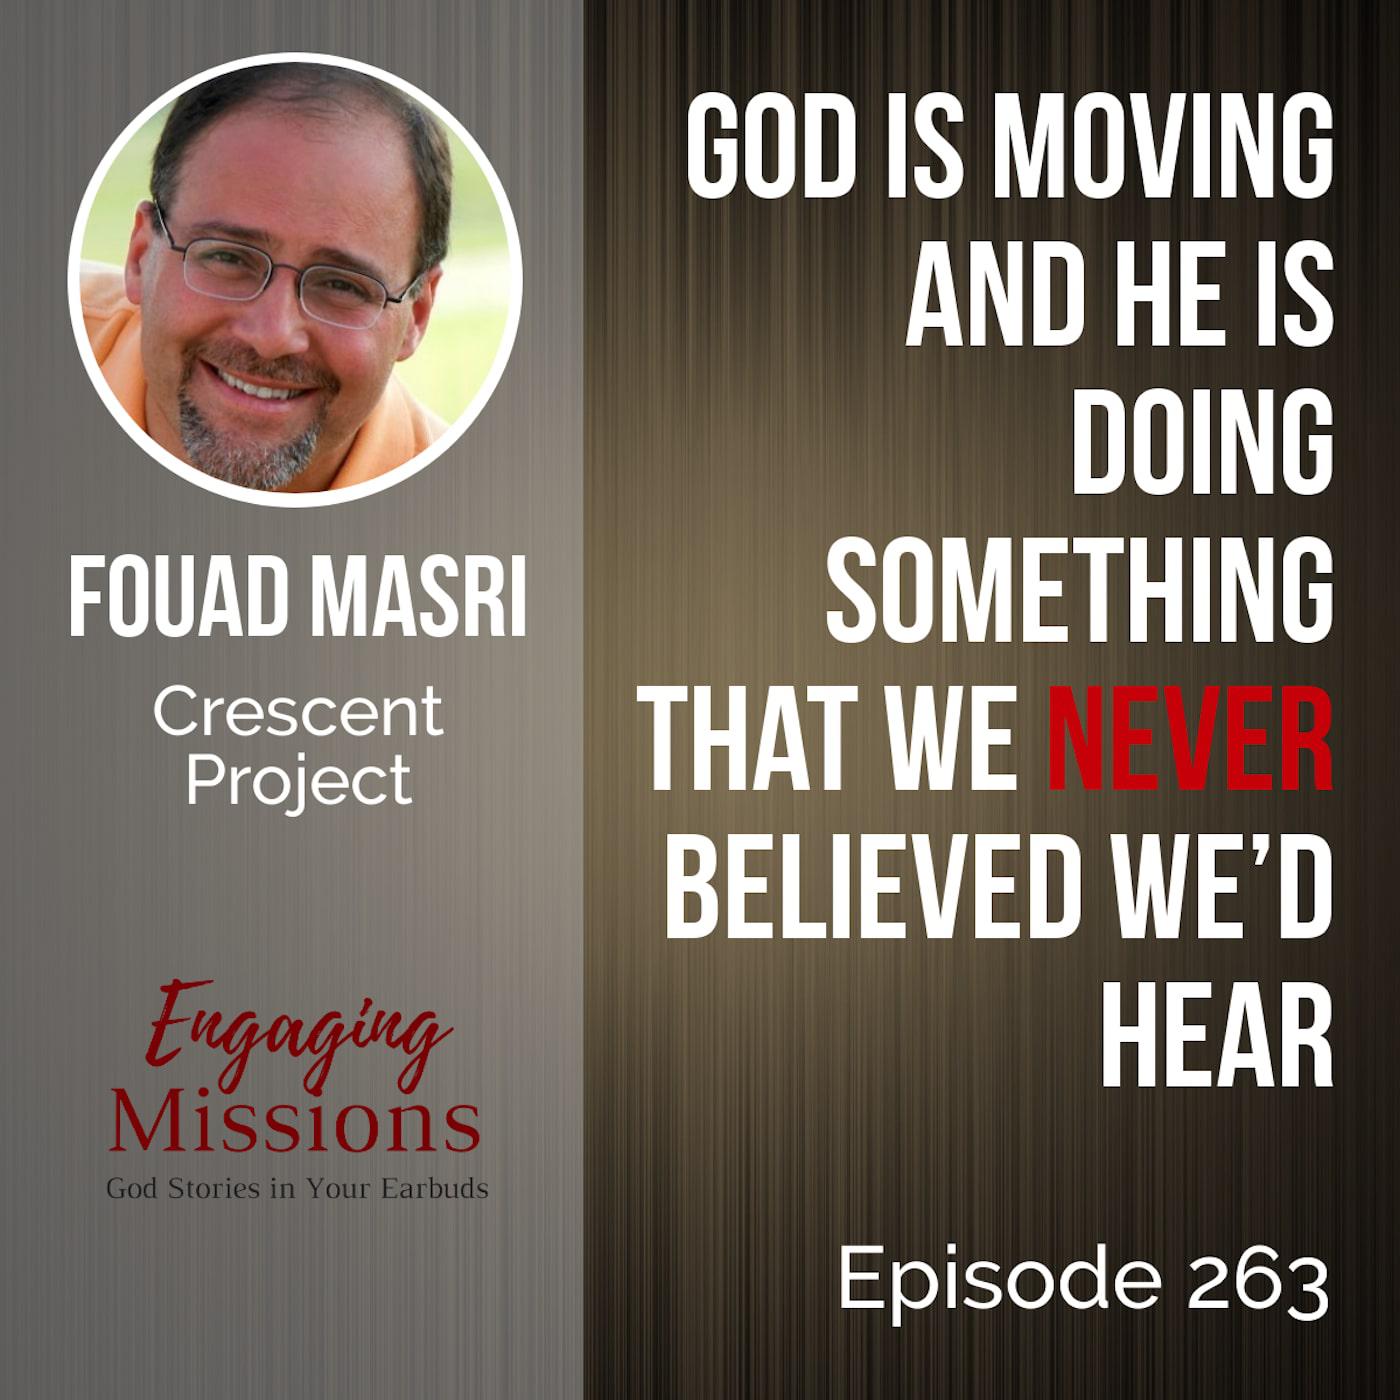 Crescent Project: How to Make the Good News Accessible to Muslims, with Fouad Masri – EM263